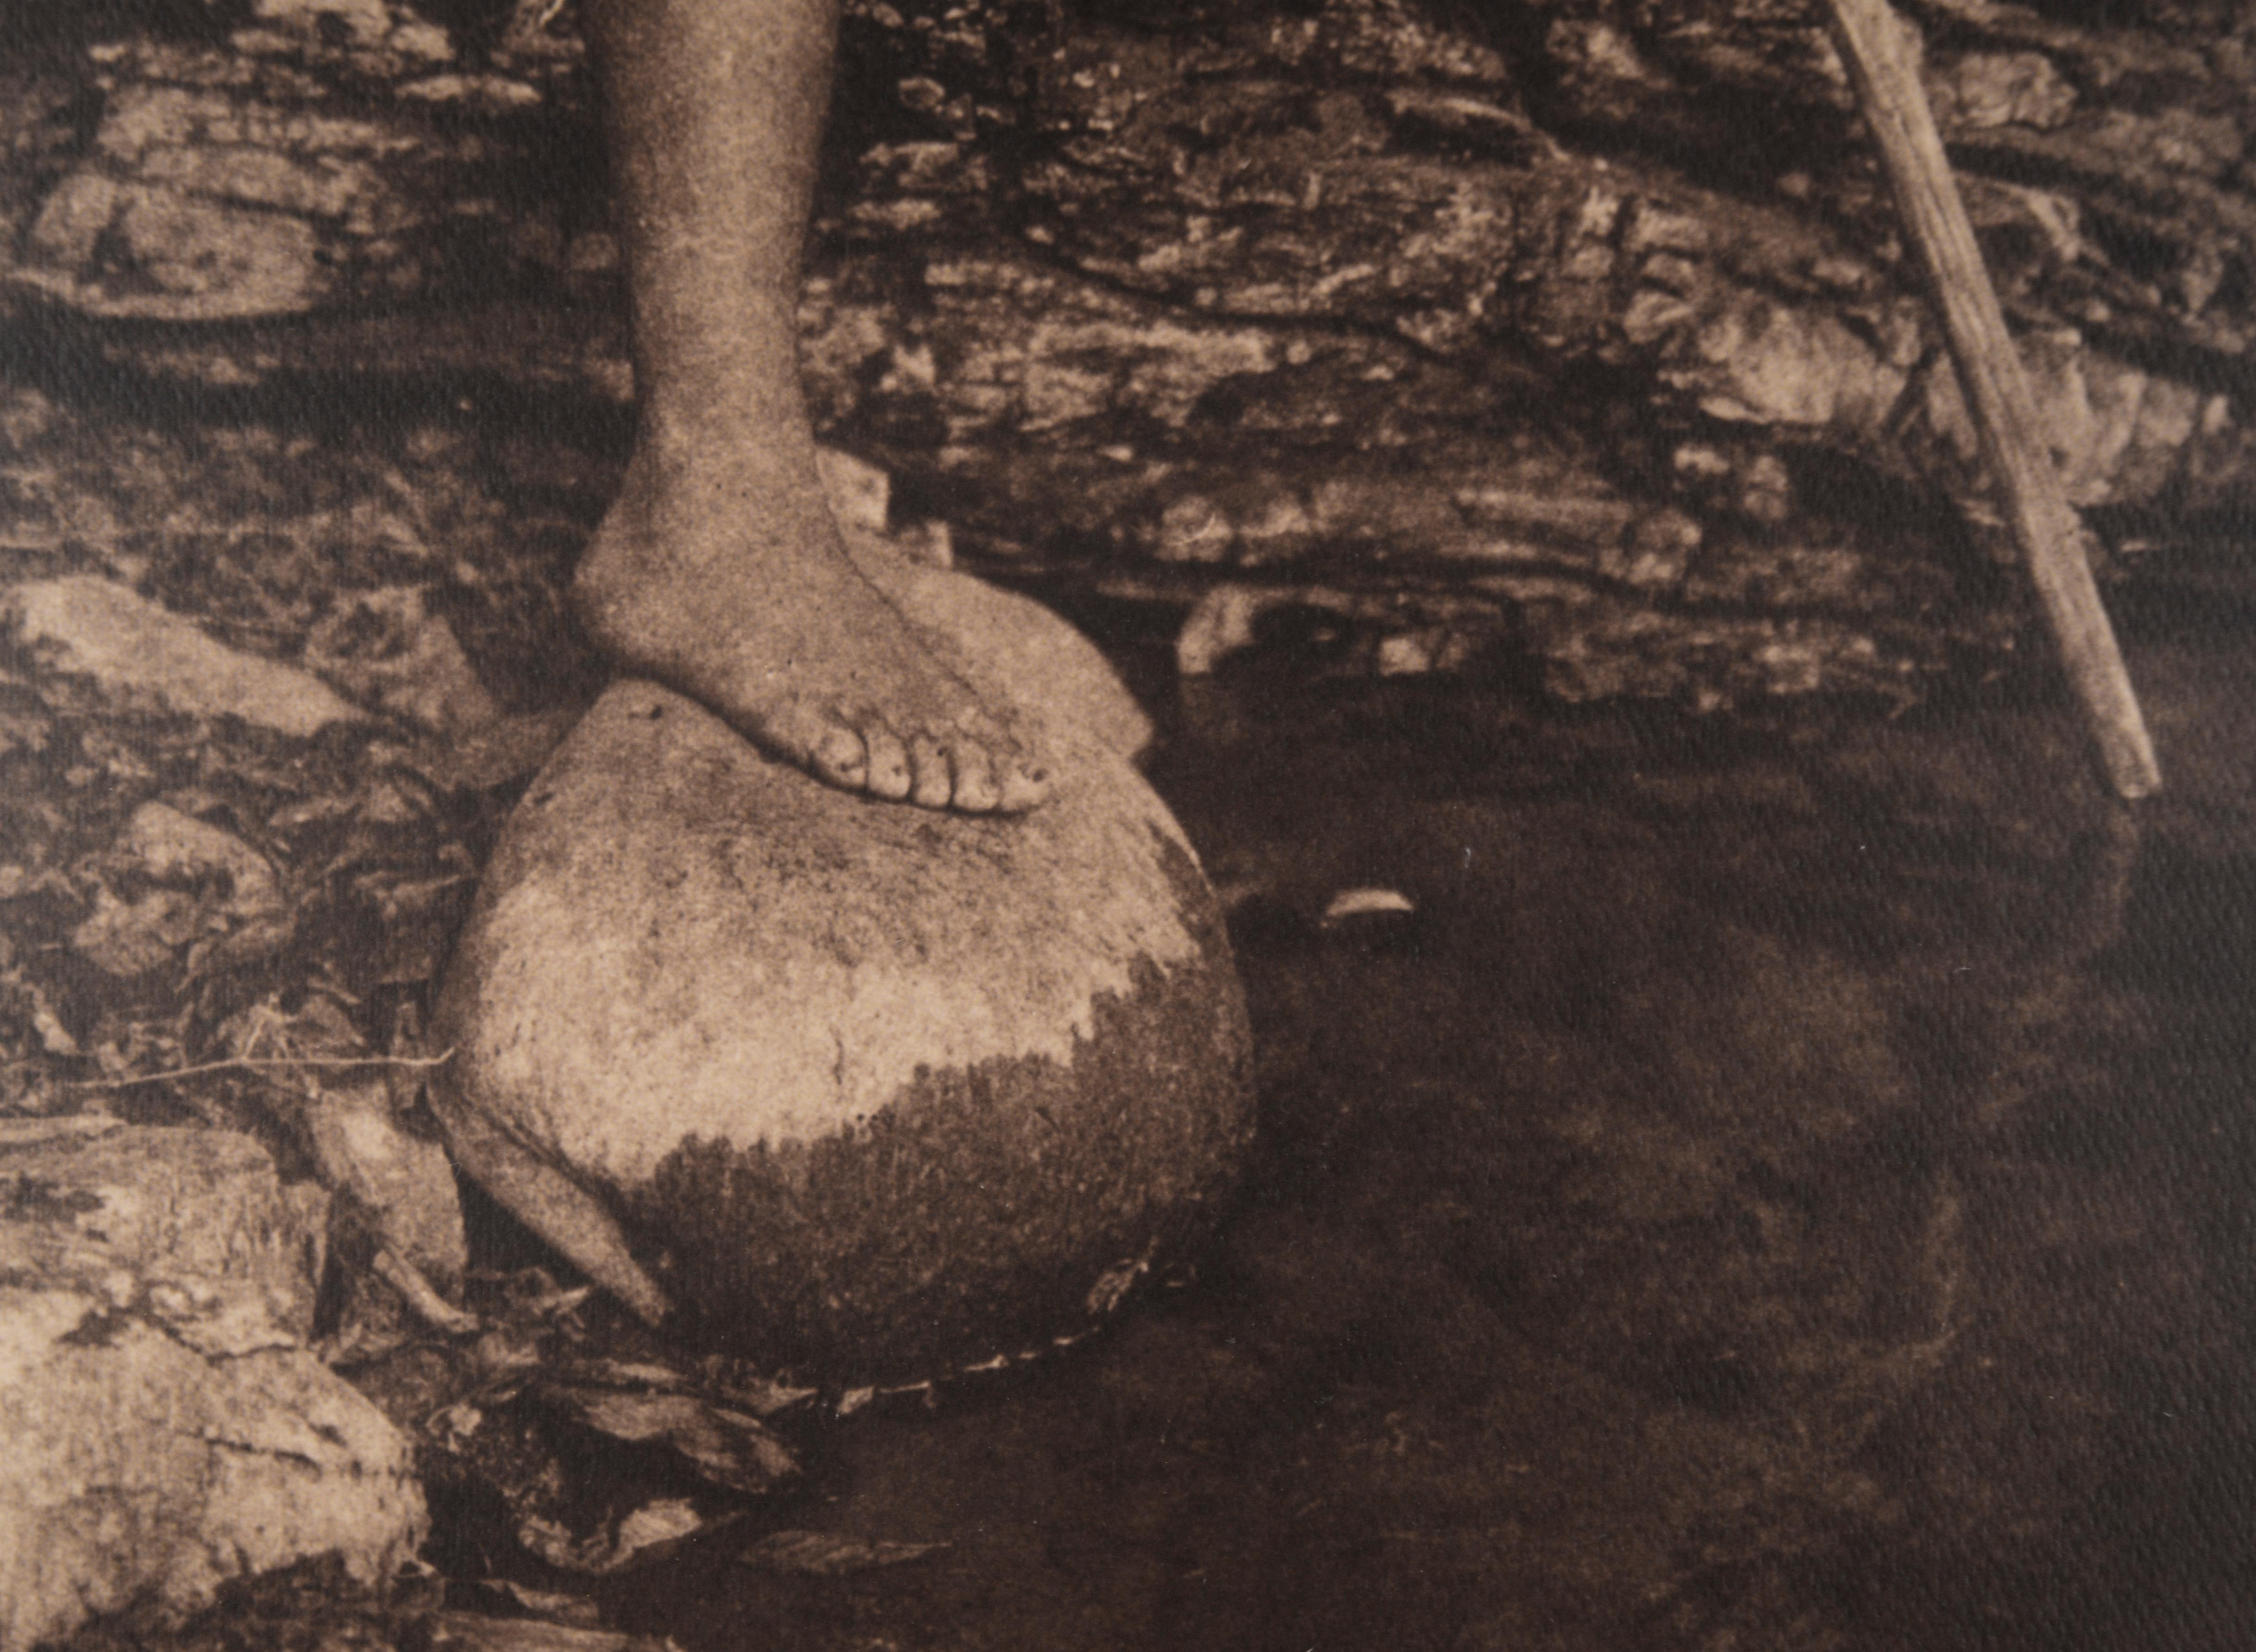 Silver and sepia tone photographic print of an indigenous spearfisher by Edward Sheriff Curtis, image circa 1901 (American, 1868-1952), as a 1974 copy of (and printed from negatives derived from) the original Edward Curtis copper gravure plate, by